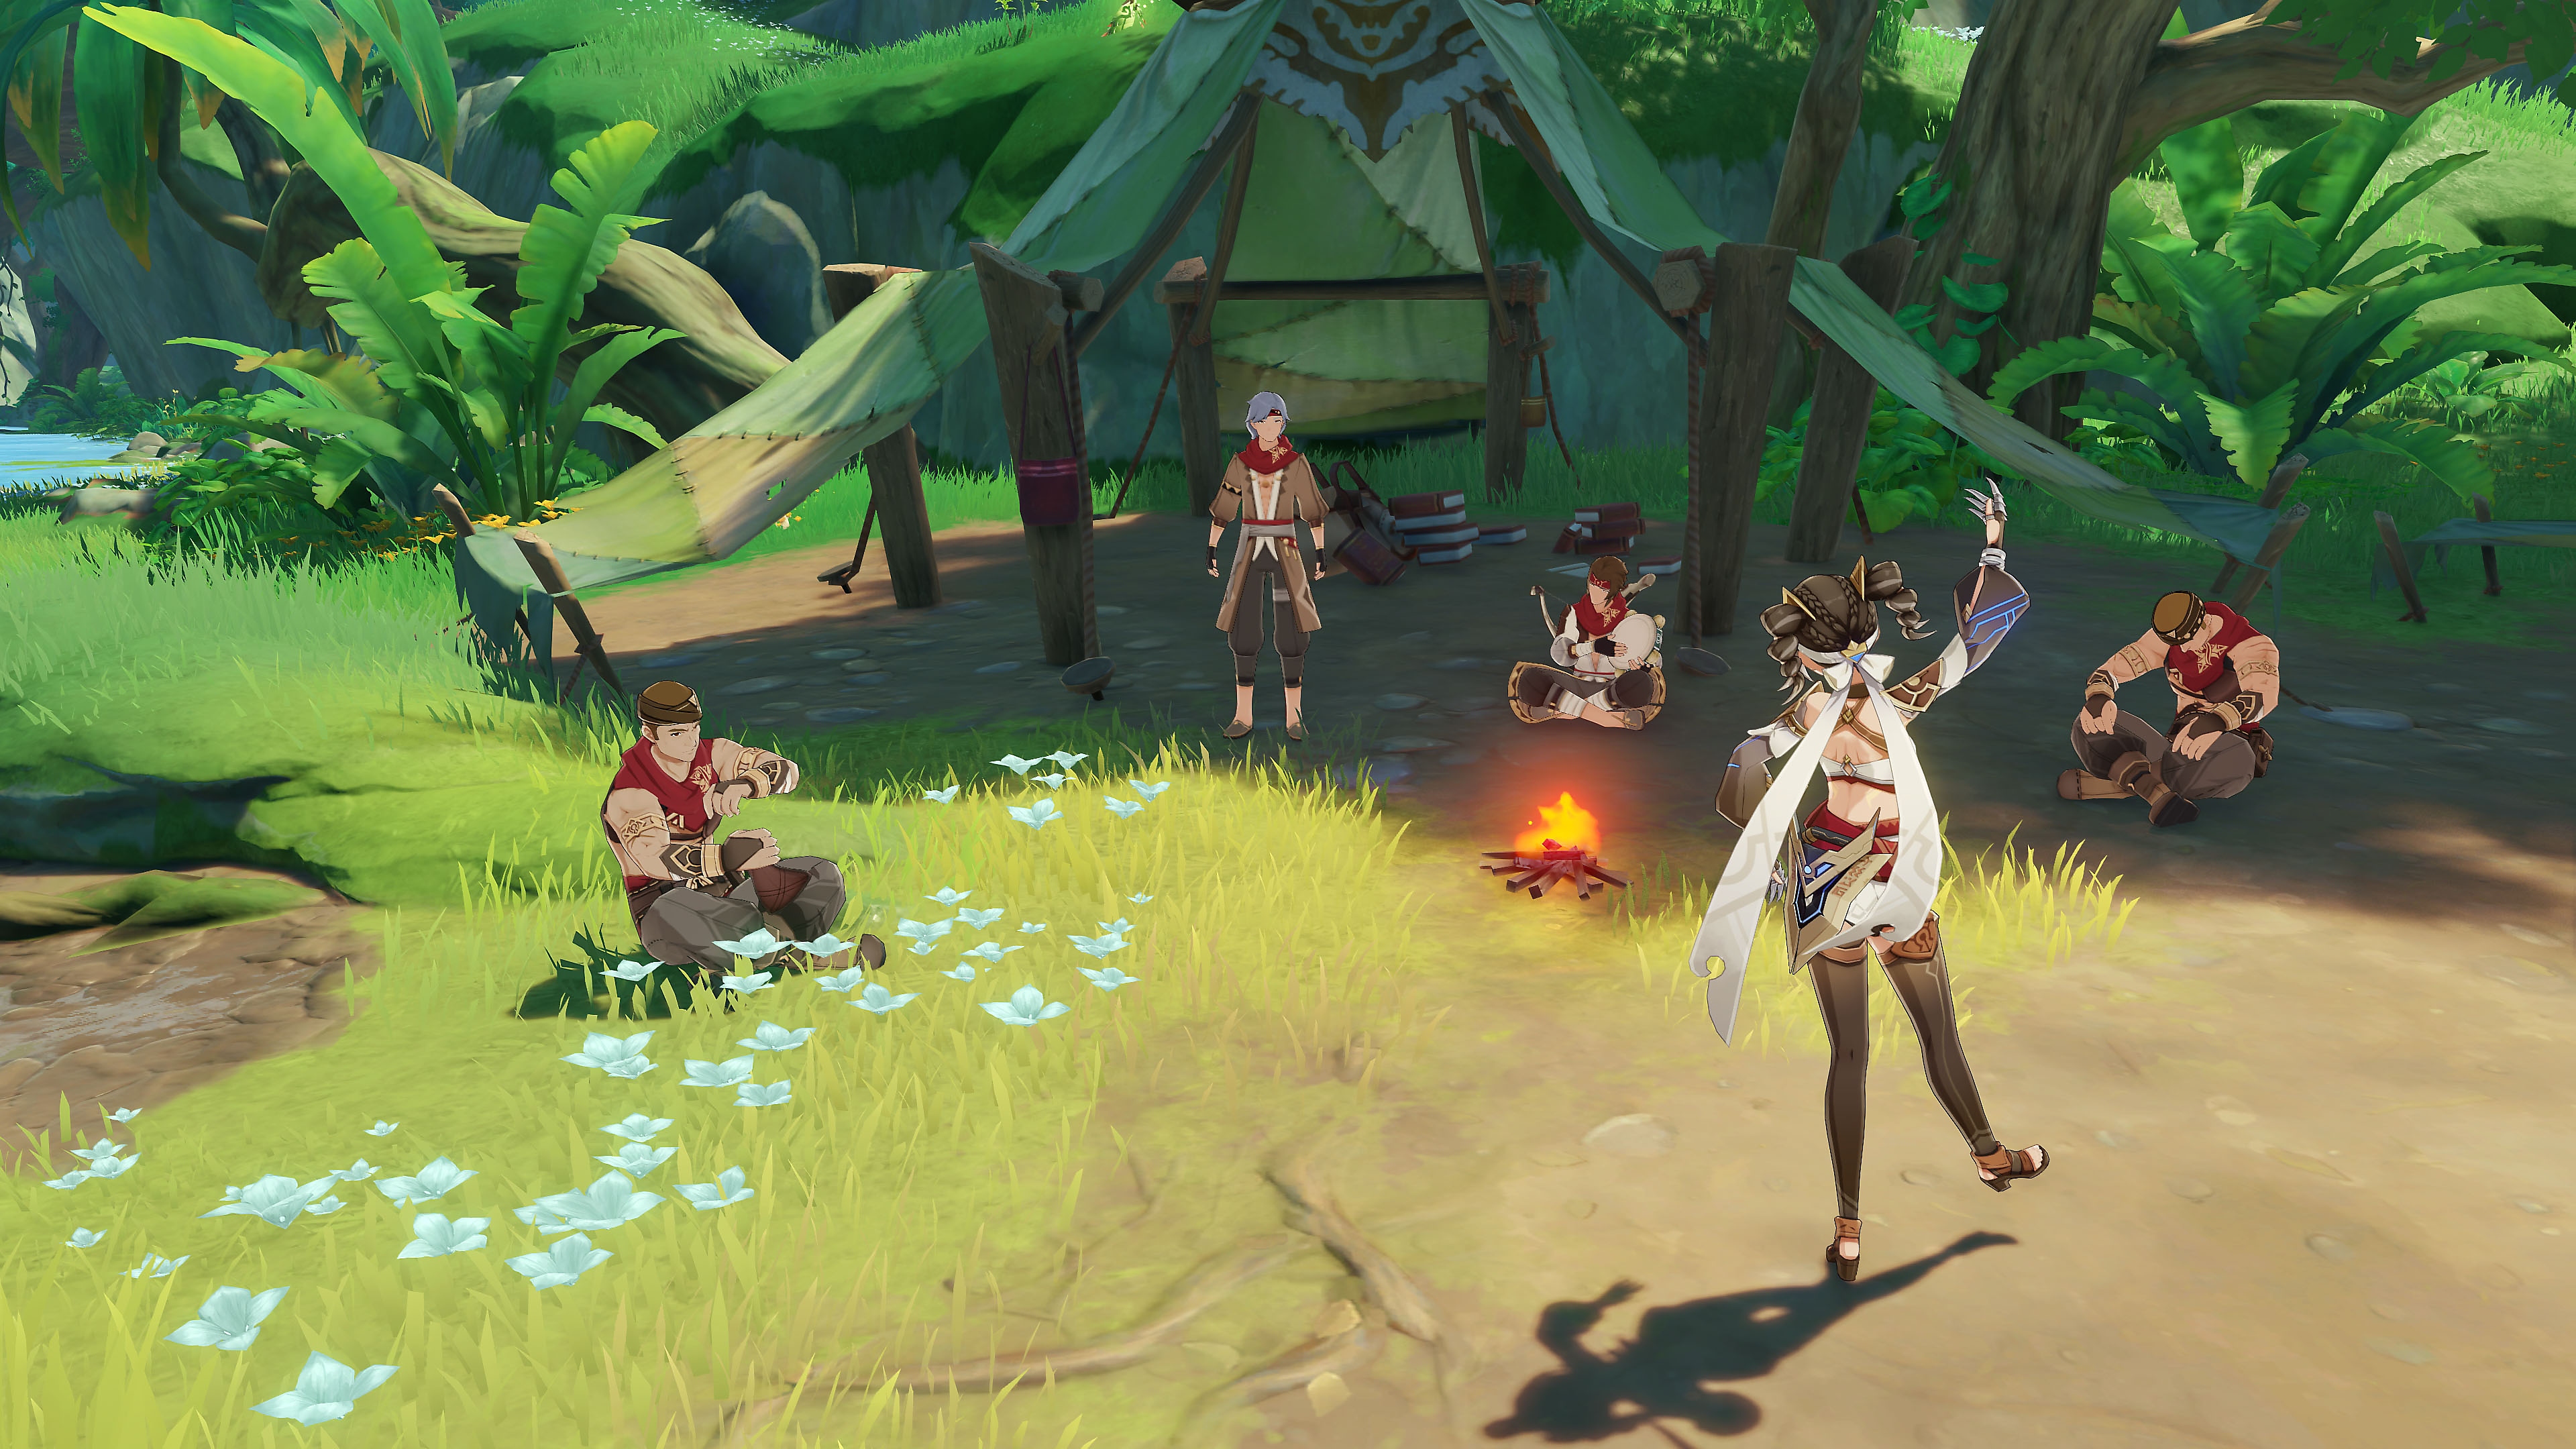 Genshin Impact: 3.0 Update screenshot showing several characters sitting around a camp fire